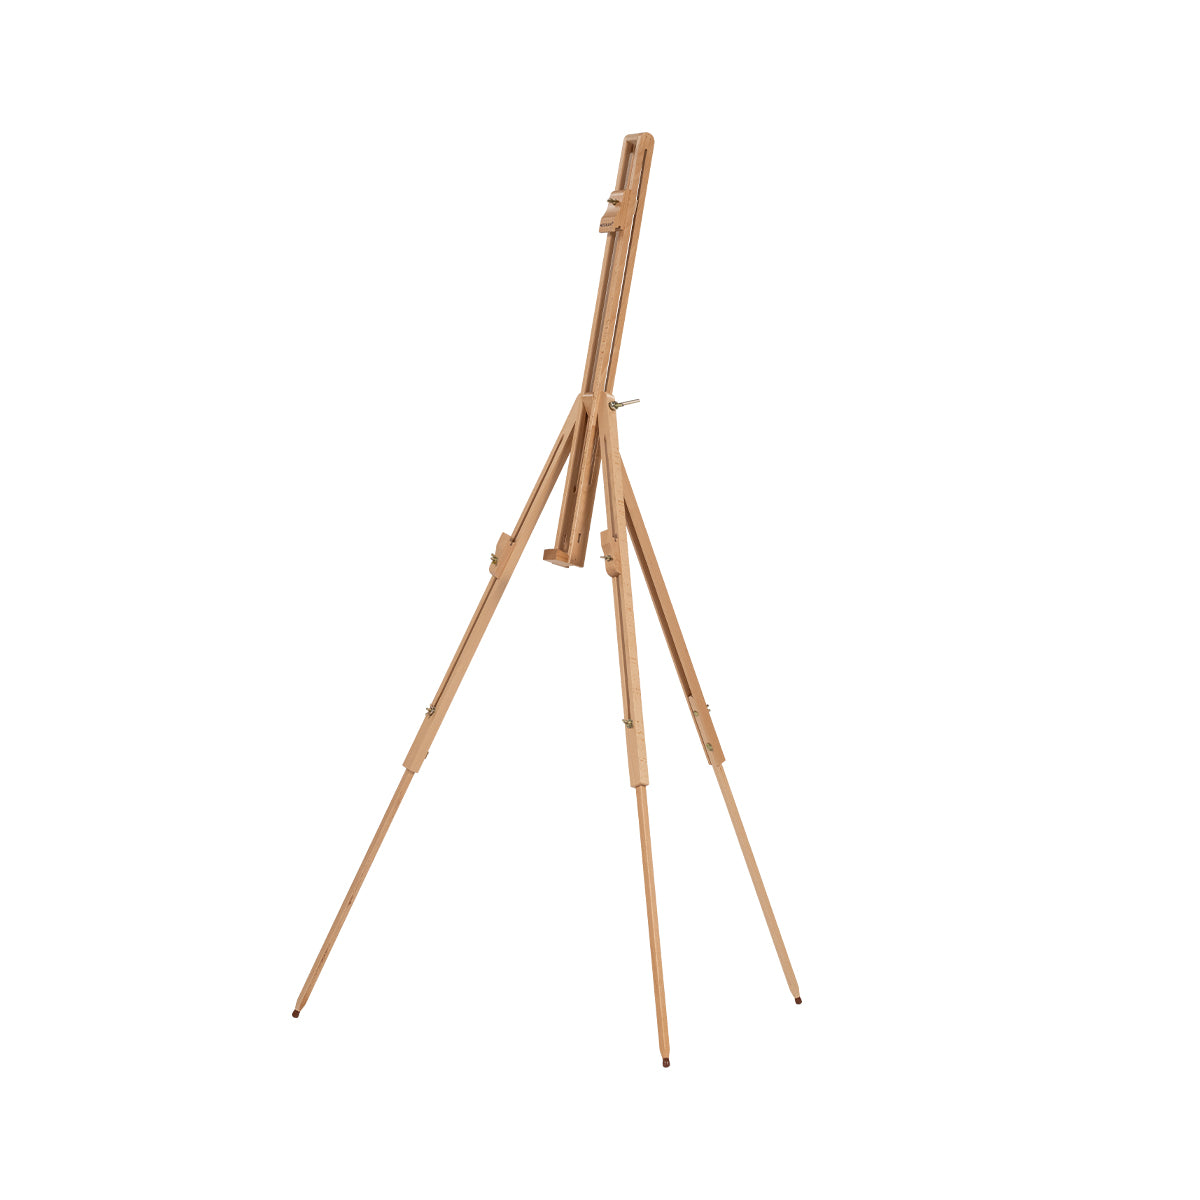 MEEDEN Tripod Plein Air Easel with Carrying Case-W07